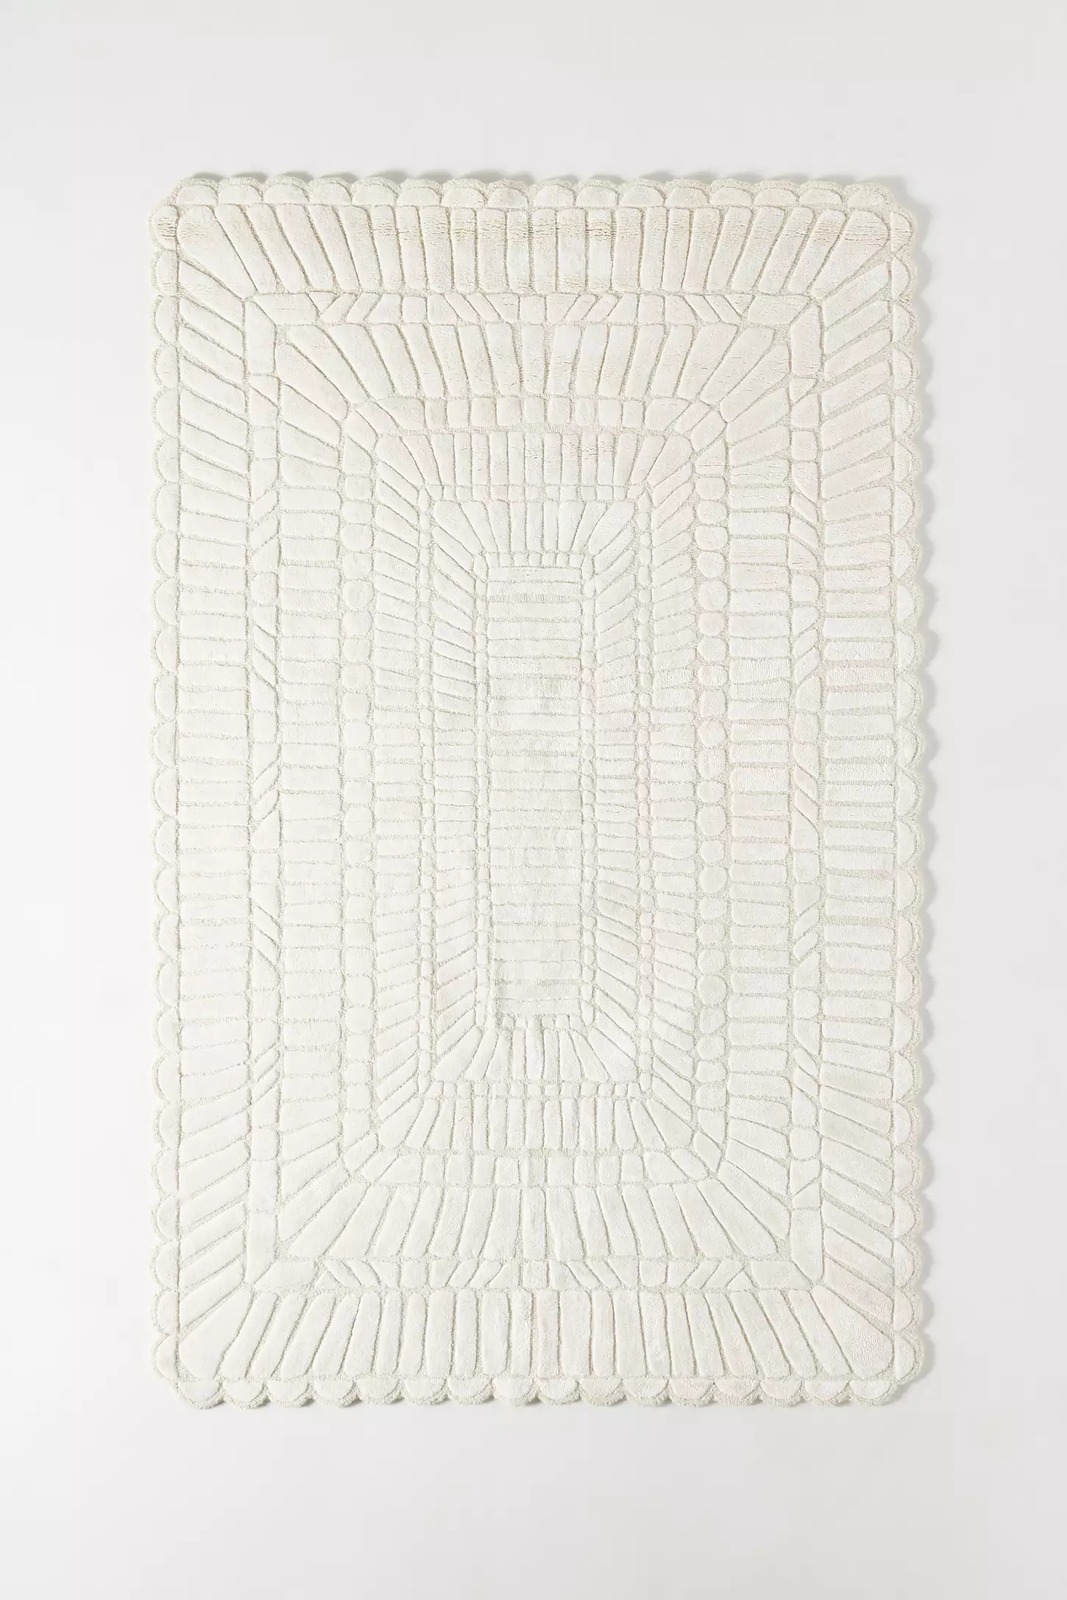 Primary image for Area Rug 9' x 12' Leighton Hand Tufted Anthropologie Woolen Carpet Free Delivery